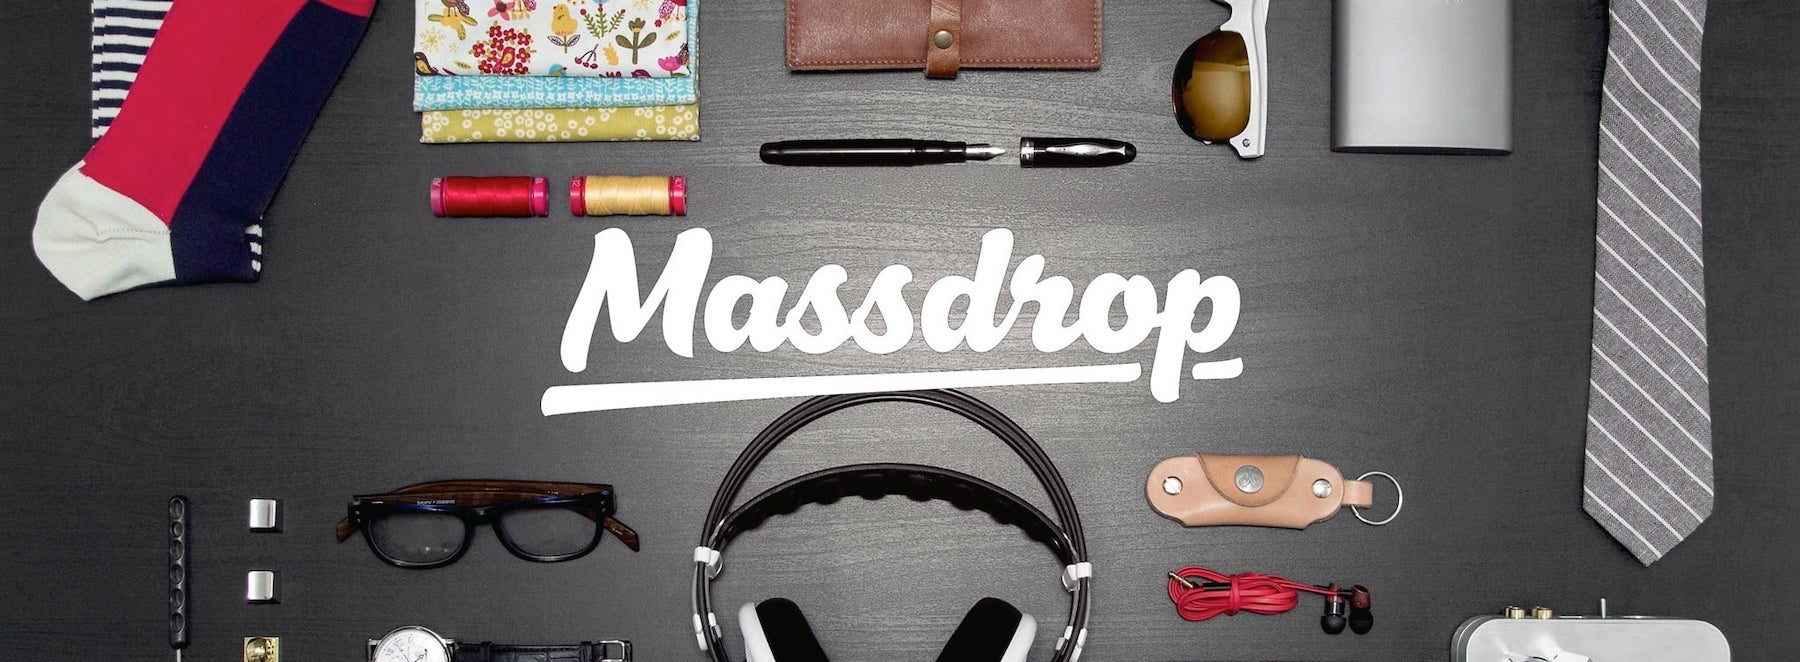 Desk with various items on it and the Massdrop logo in the center